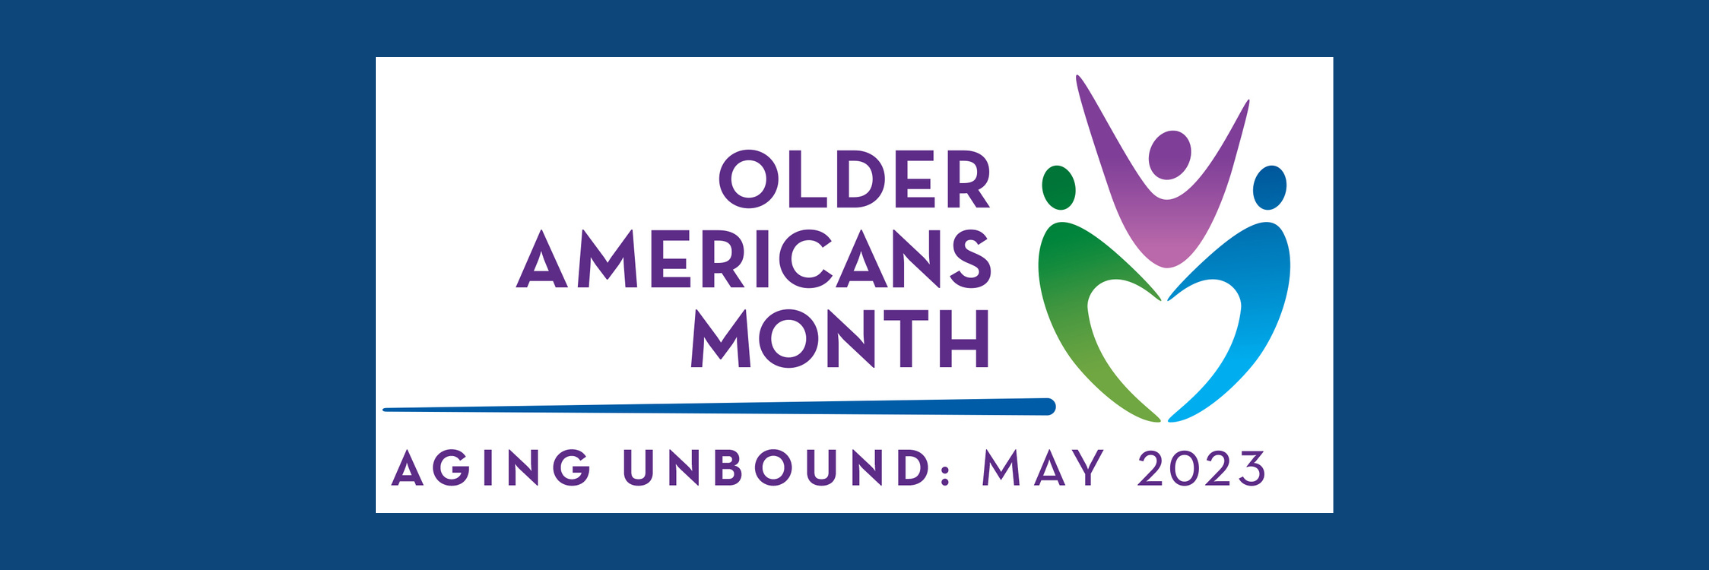 Text that says Older Americans Month Aging Unbound May 2023. Includes logo showing three figures with outstretched arms creating negative space shaped like a heart.